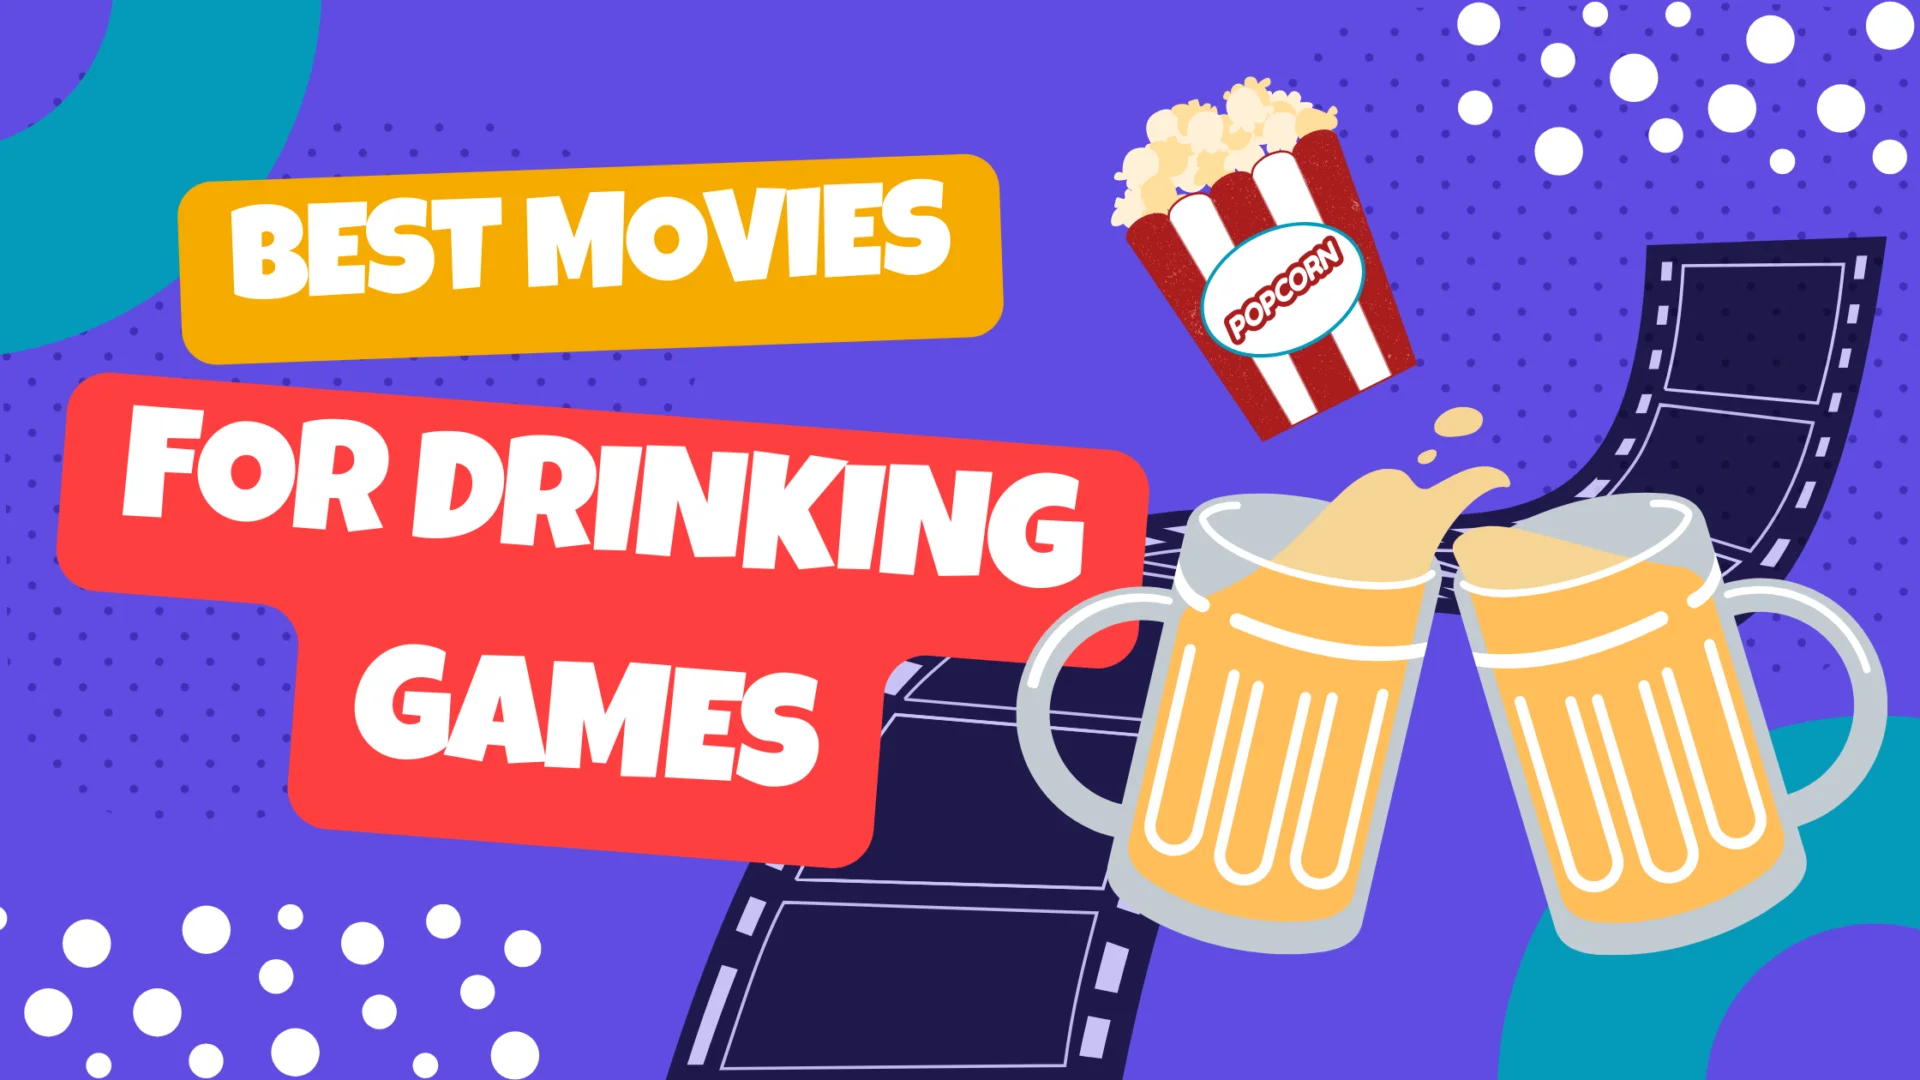 Best Movies For Drinking Games